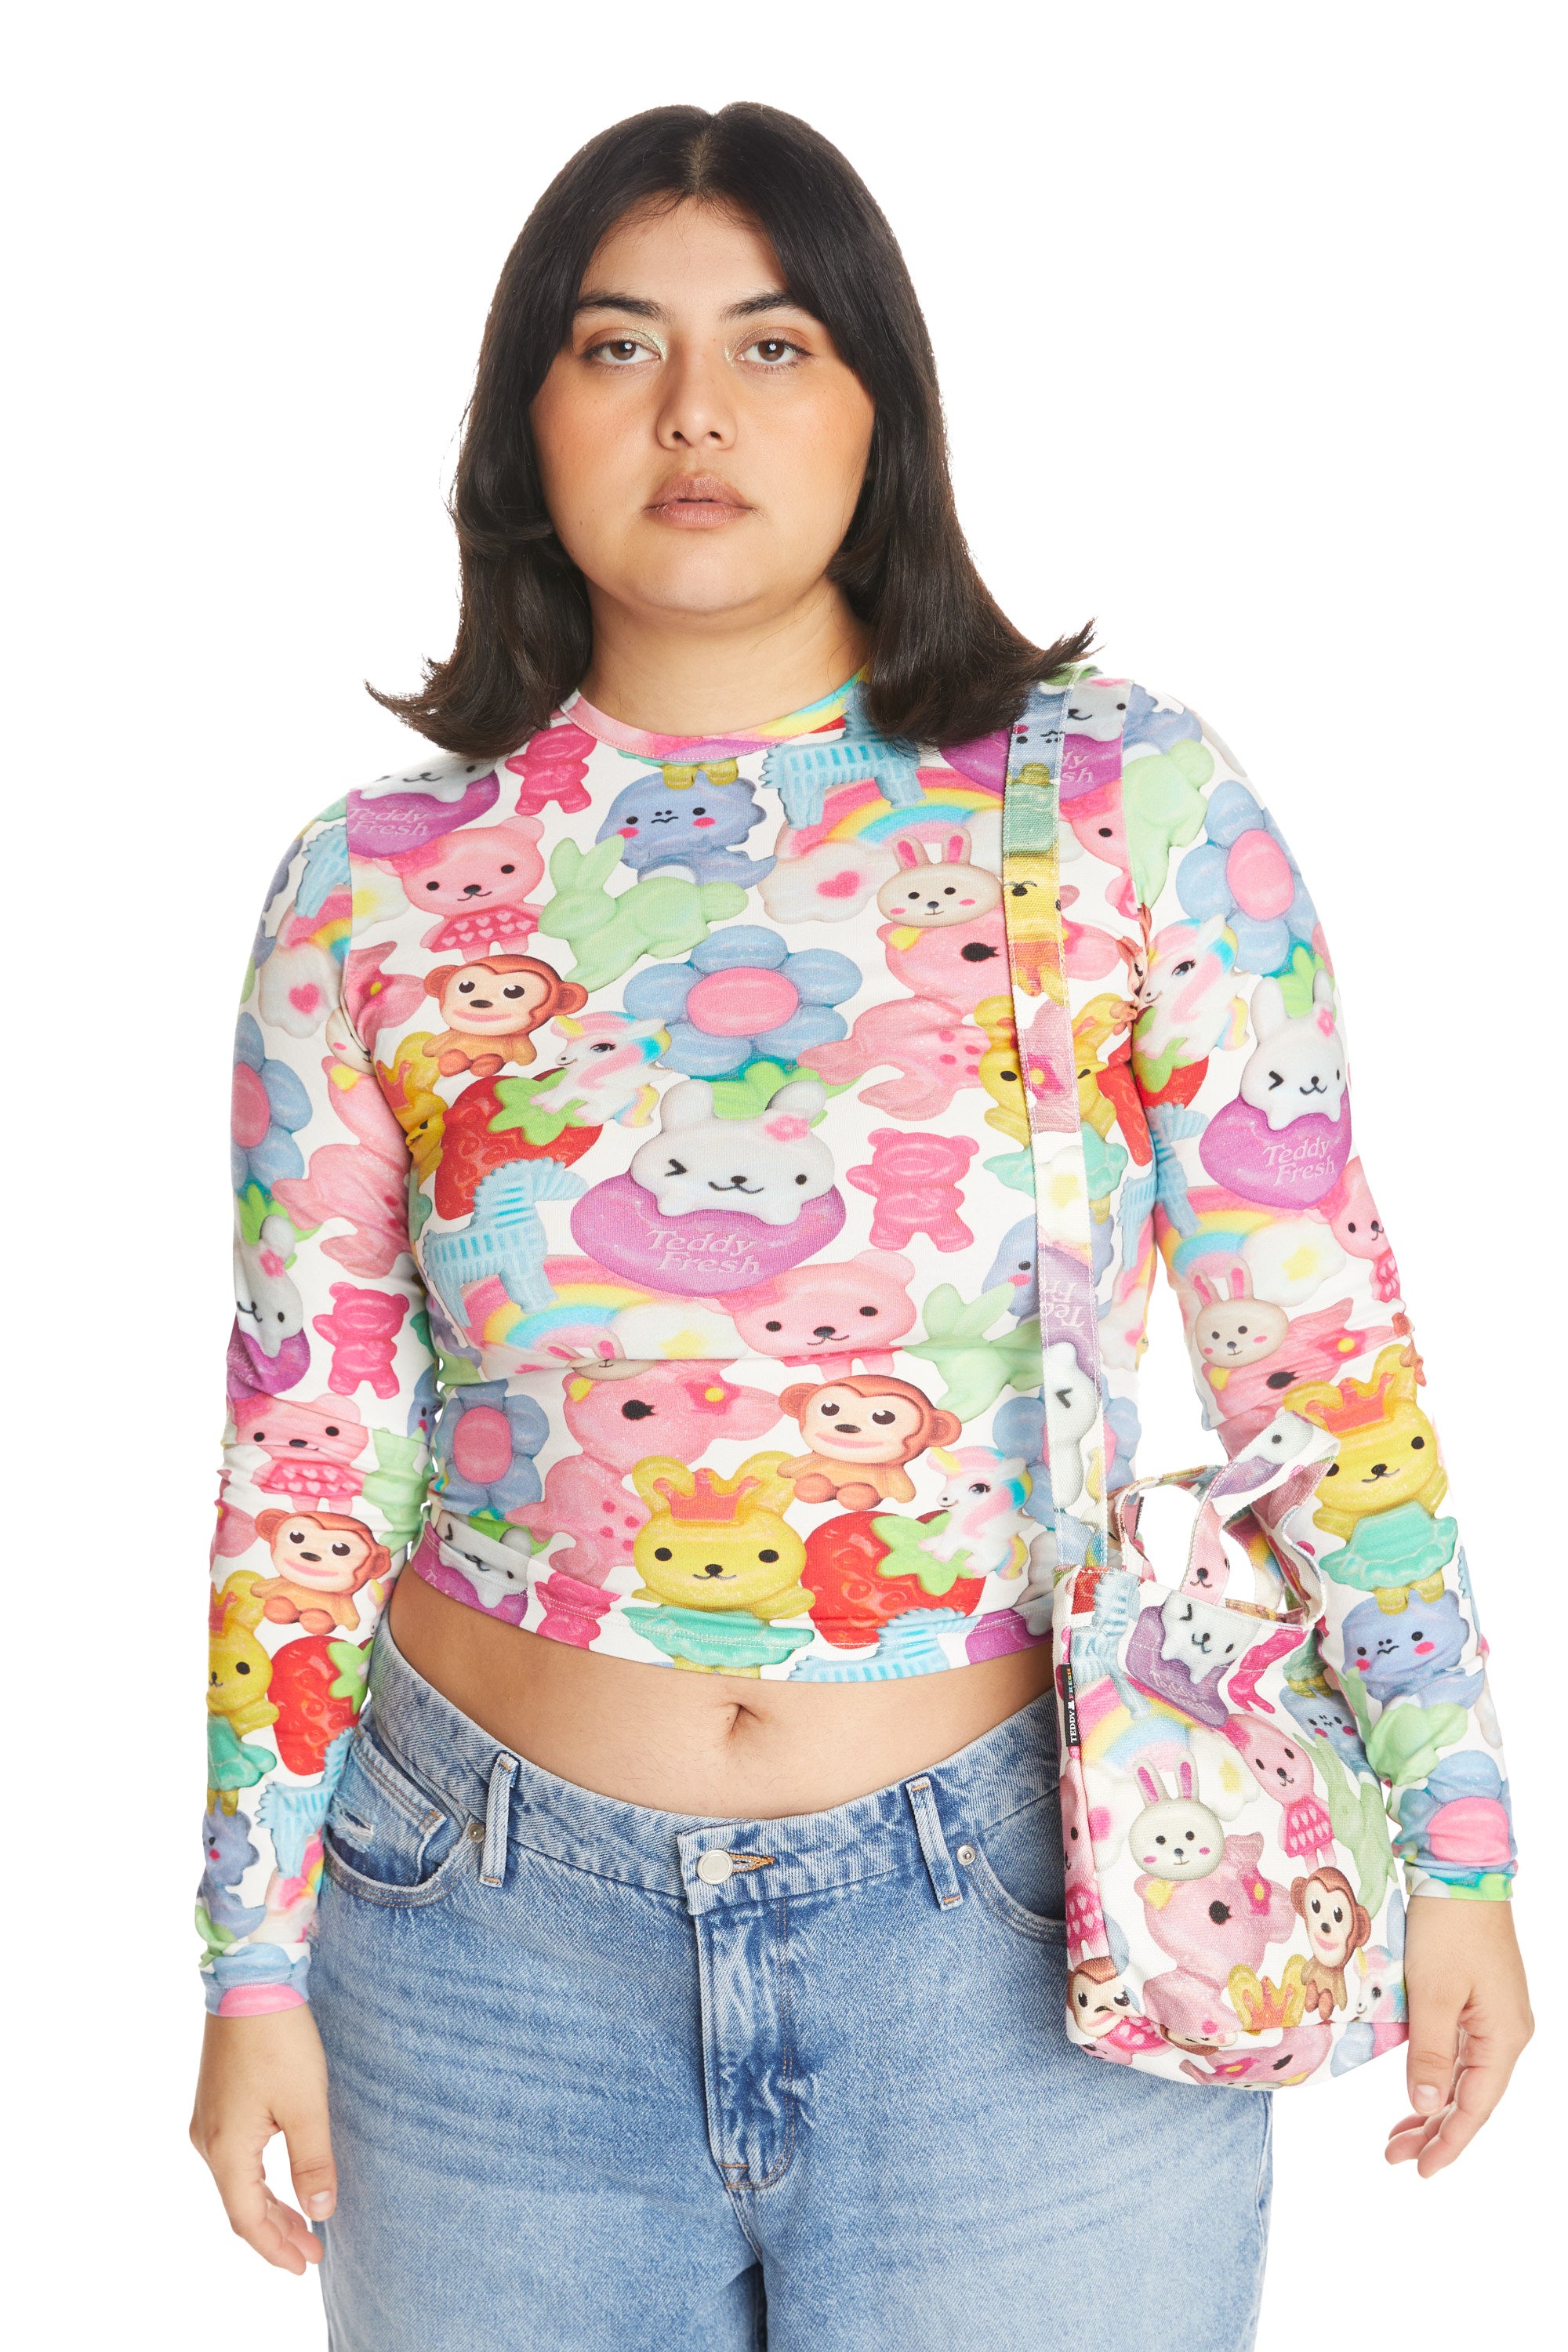 Teddy Fresh Care Bears Release Collection